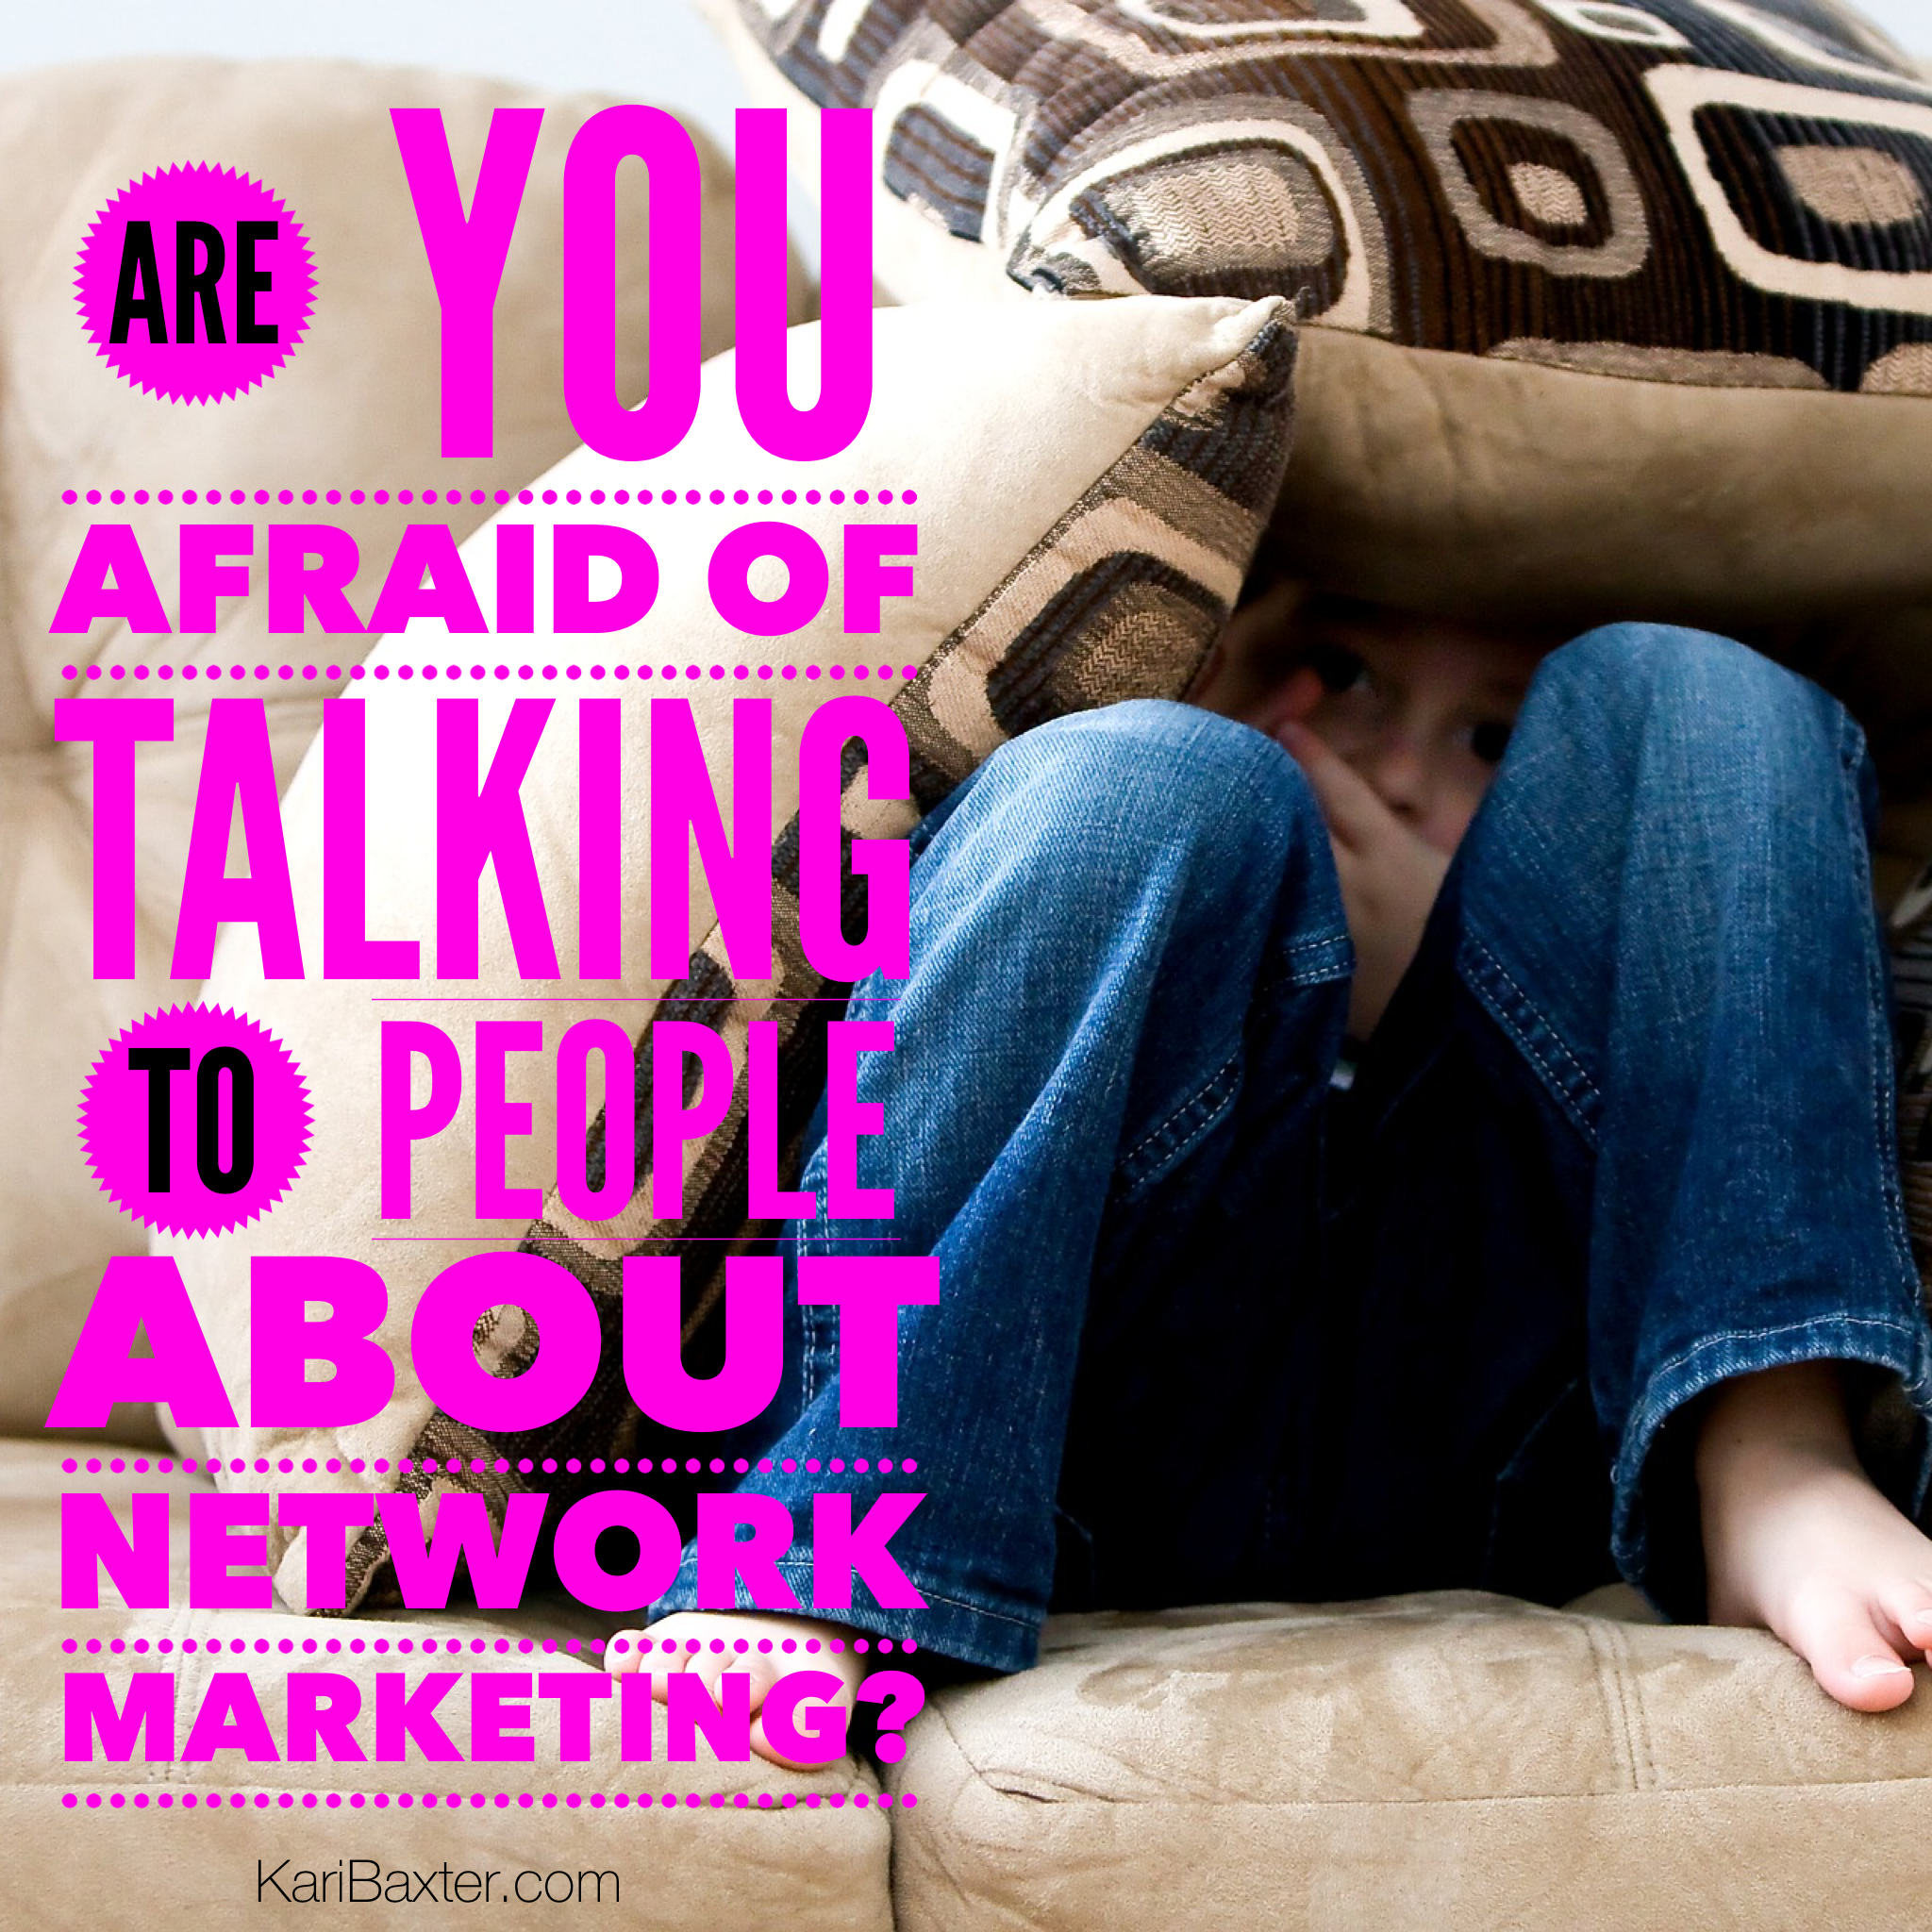 Are you afraid of talking to people about network marketing?